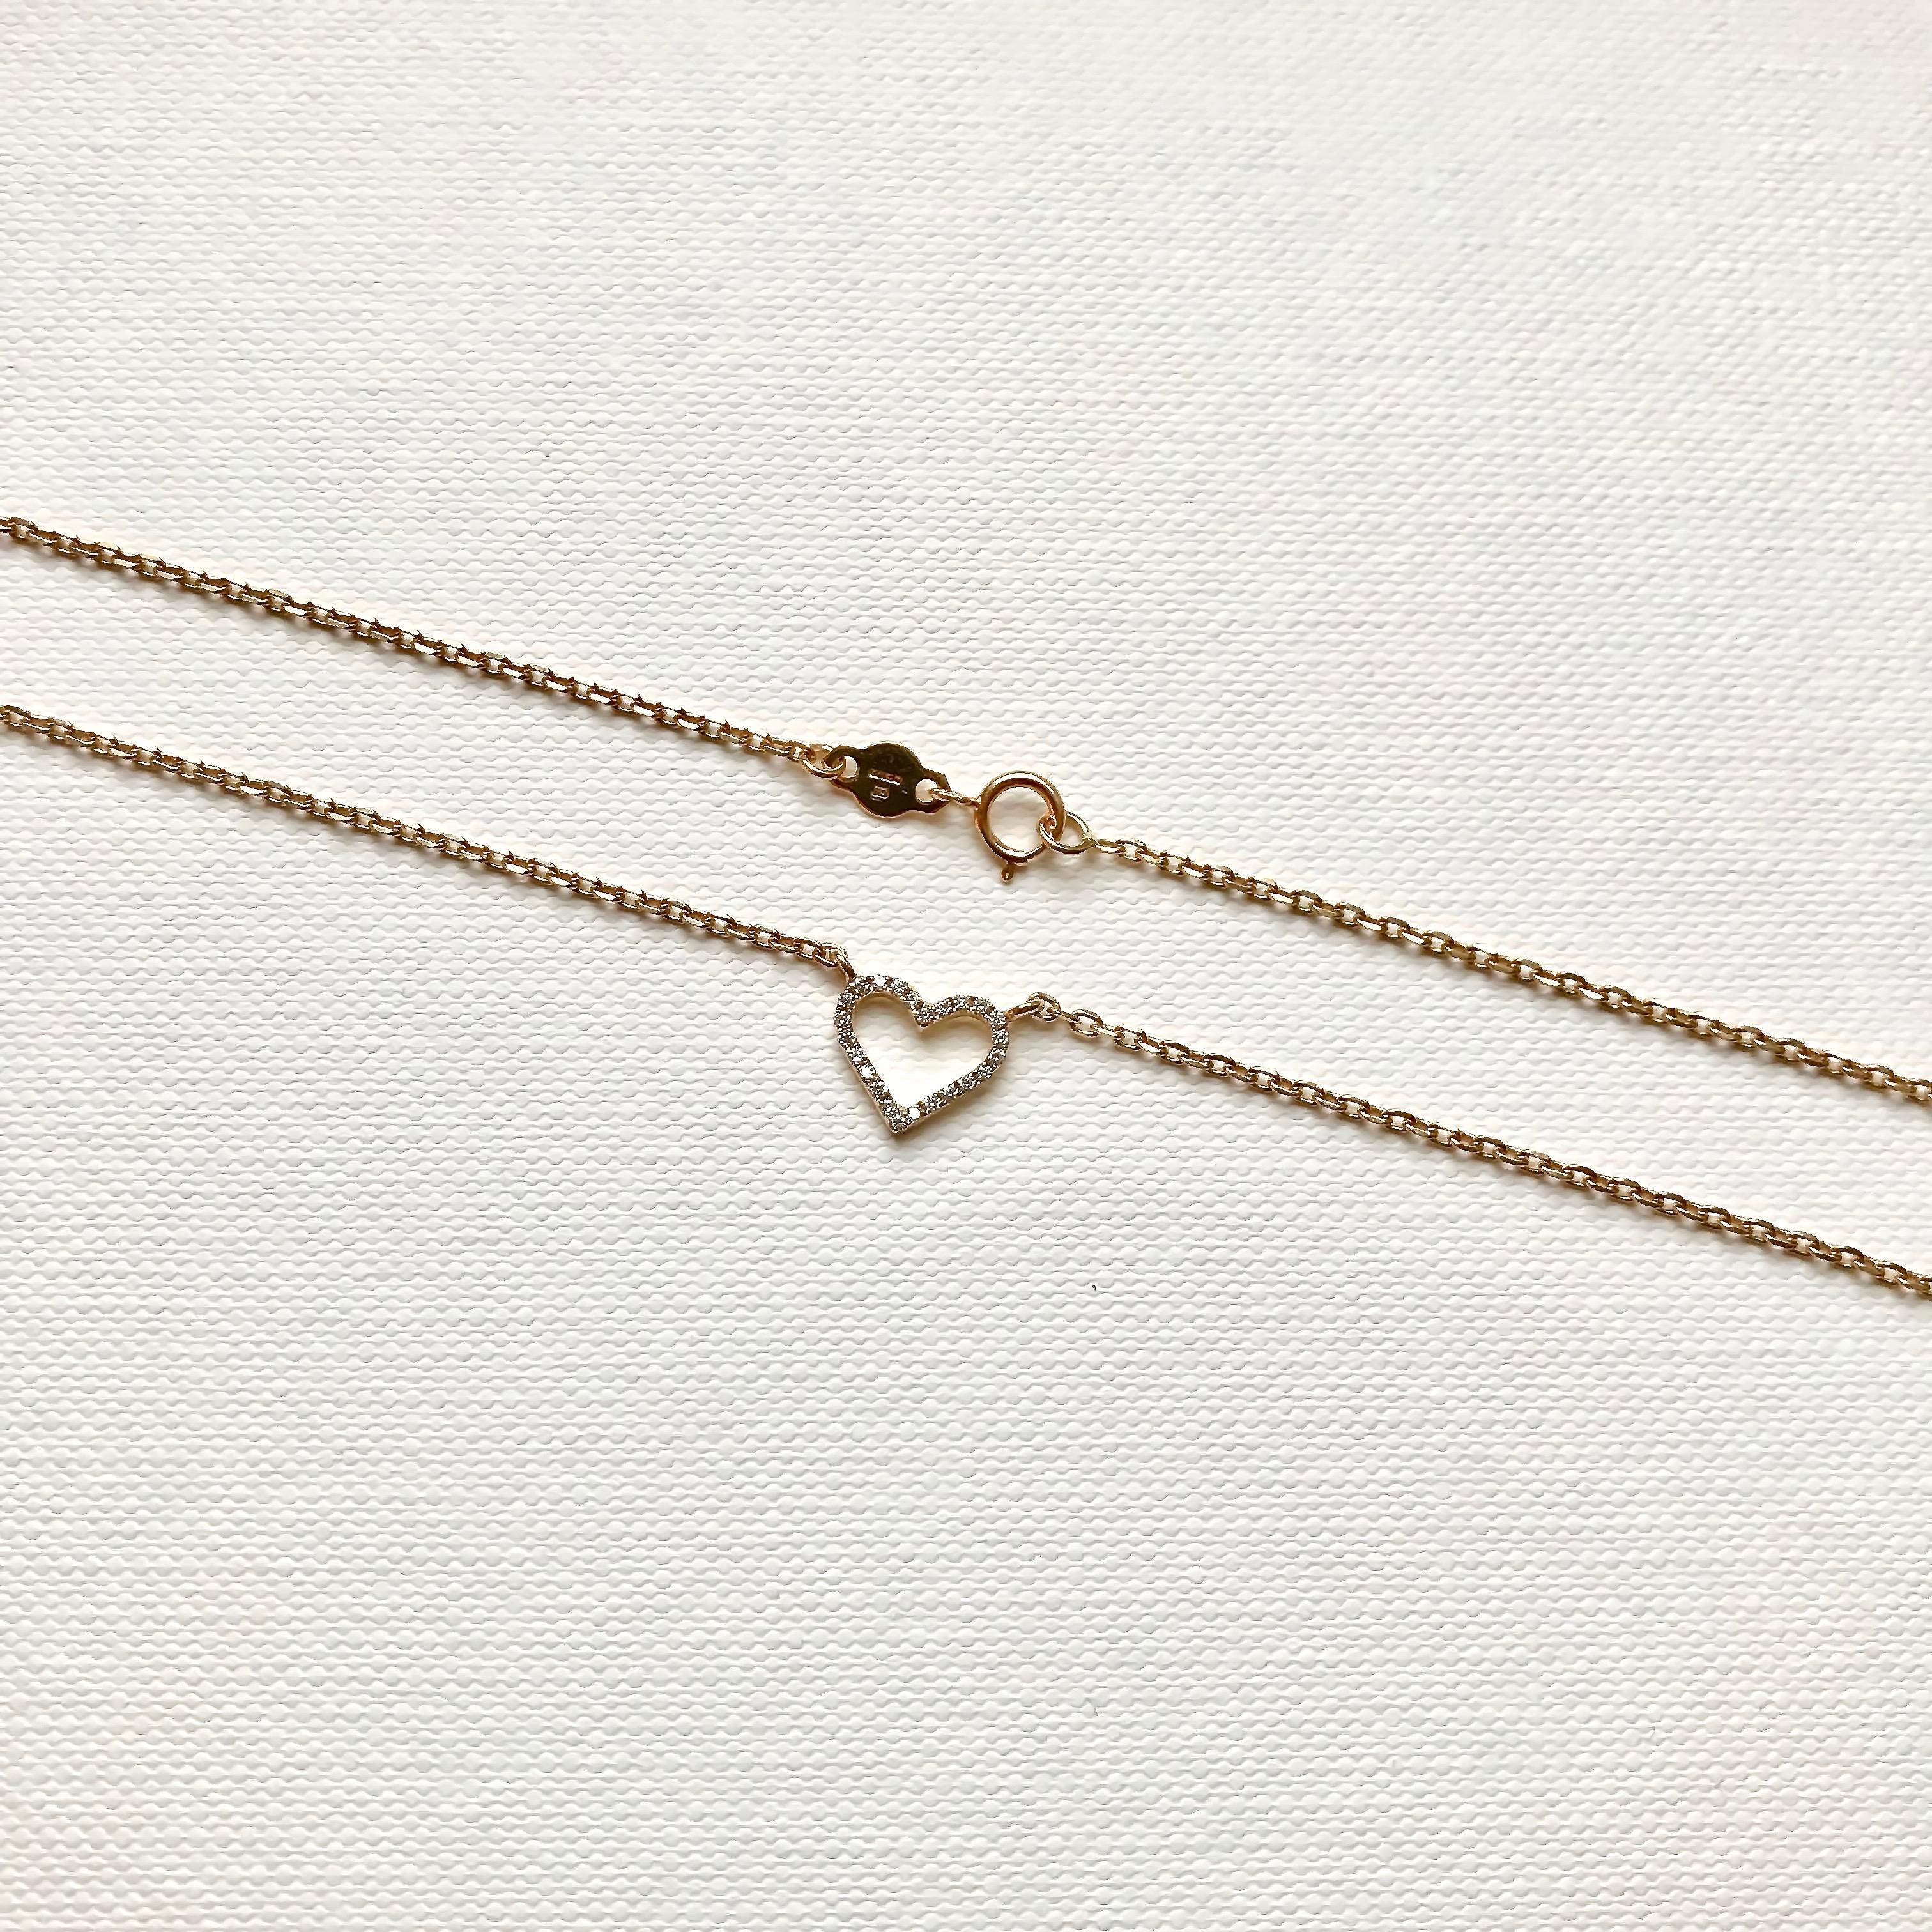 This heart necklace is made of 18Karat solid yellow gold and high-quality white diamonds. 
Beautiful to wear alone or layered with other chains and pendants.
Total Diamond Carat Weight: 0.09ct / 24 pcs
Heart's width: 9.3 mm
Hallmark: London